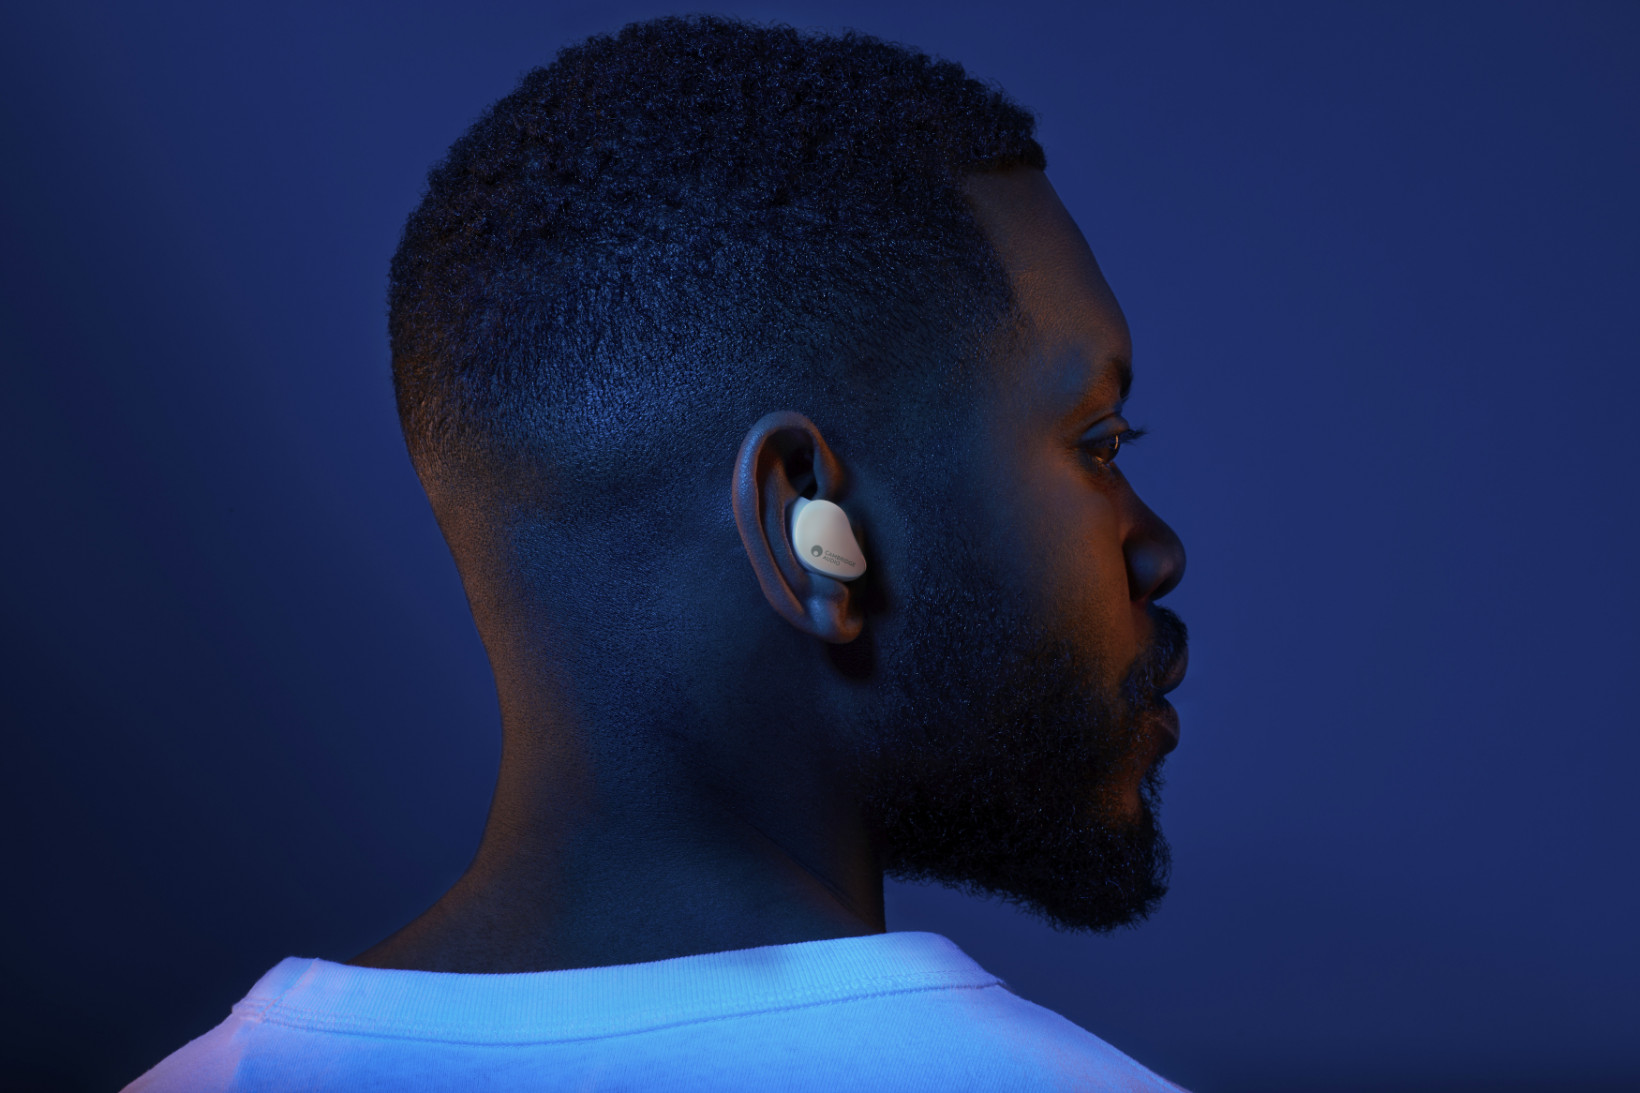 Cambridge Audio’s Melomania Touch earbuds promise 50 hours of battery life